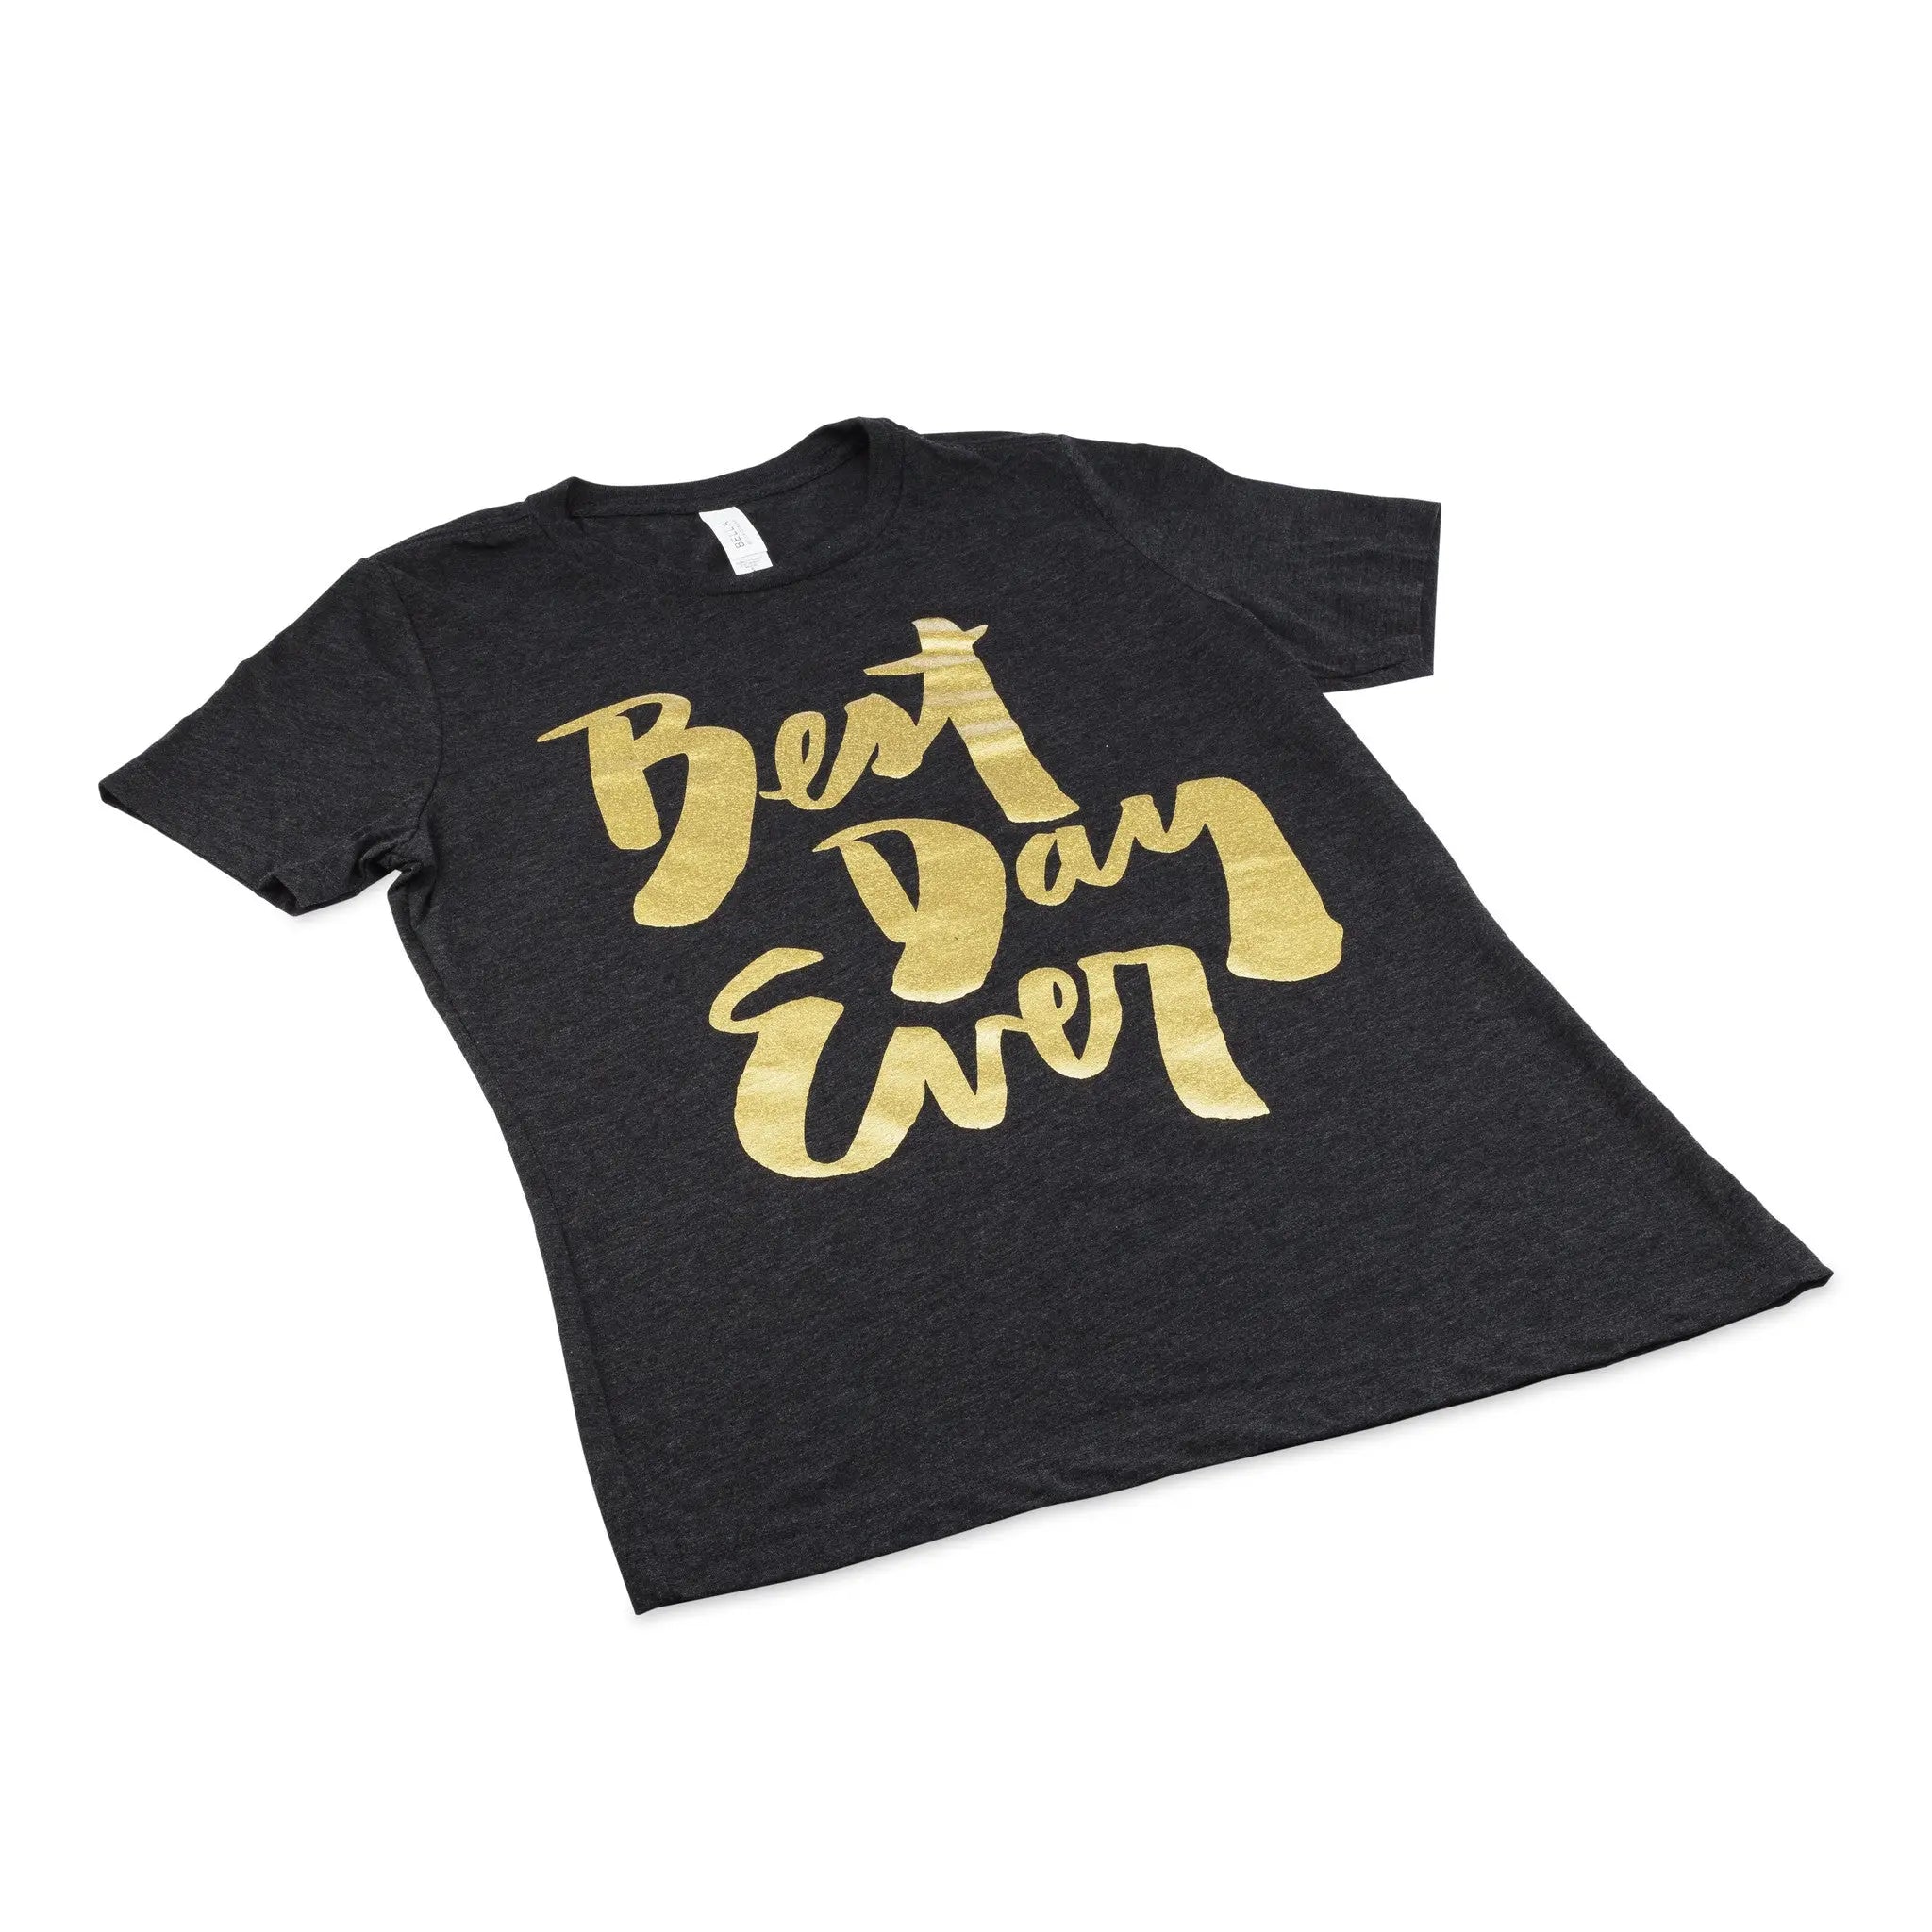 Best Day Ever T-Shirts